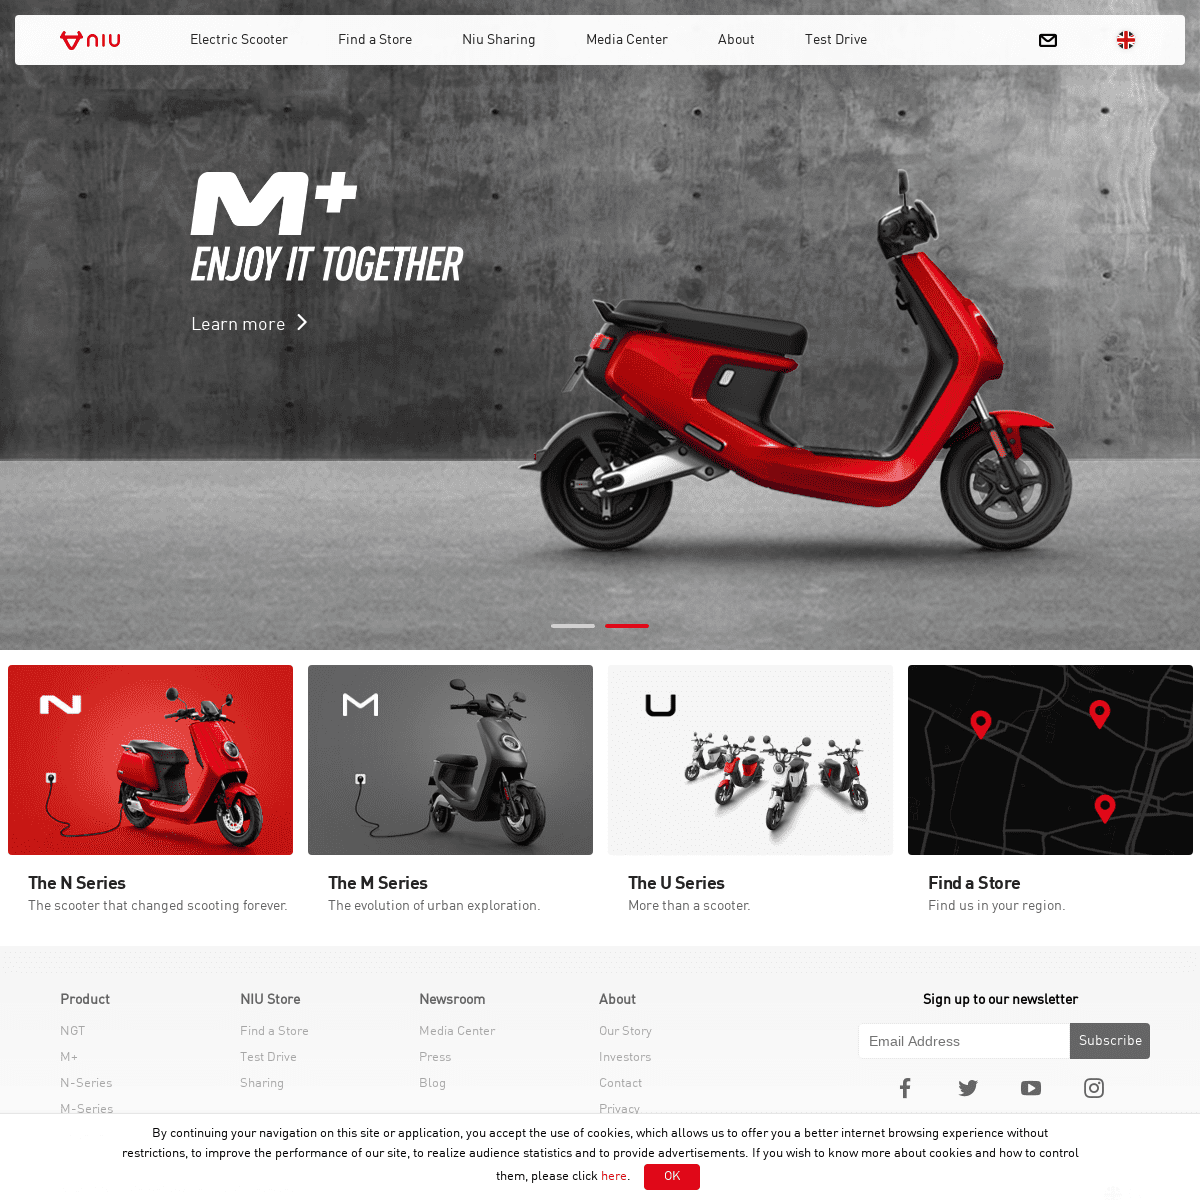 NIU - The World's #1 Smart Electric Scooter